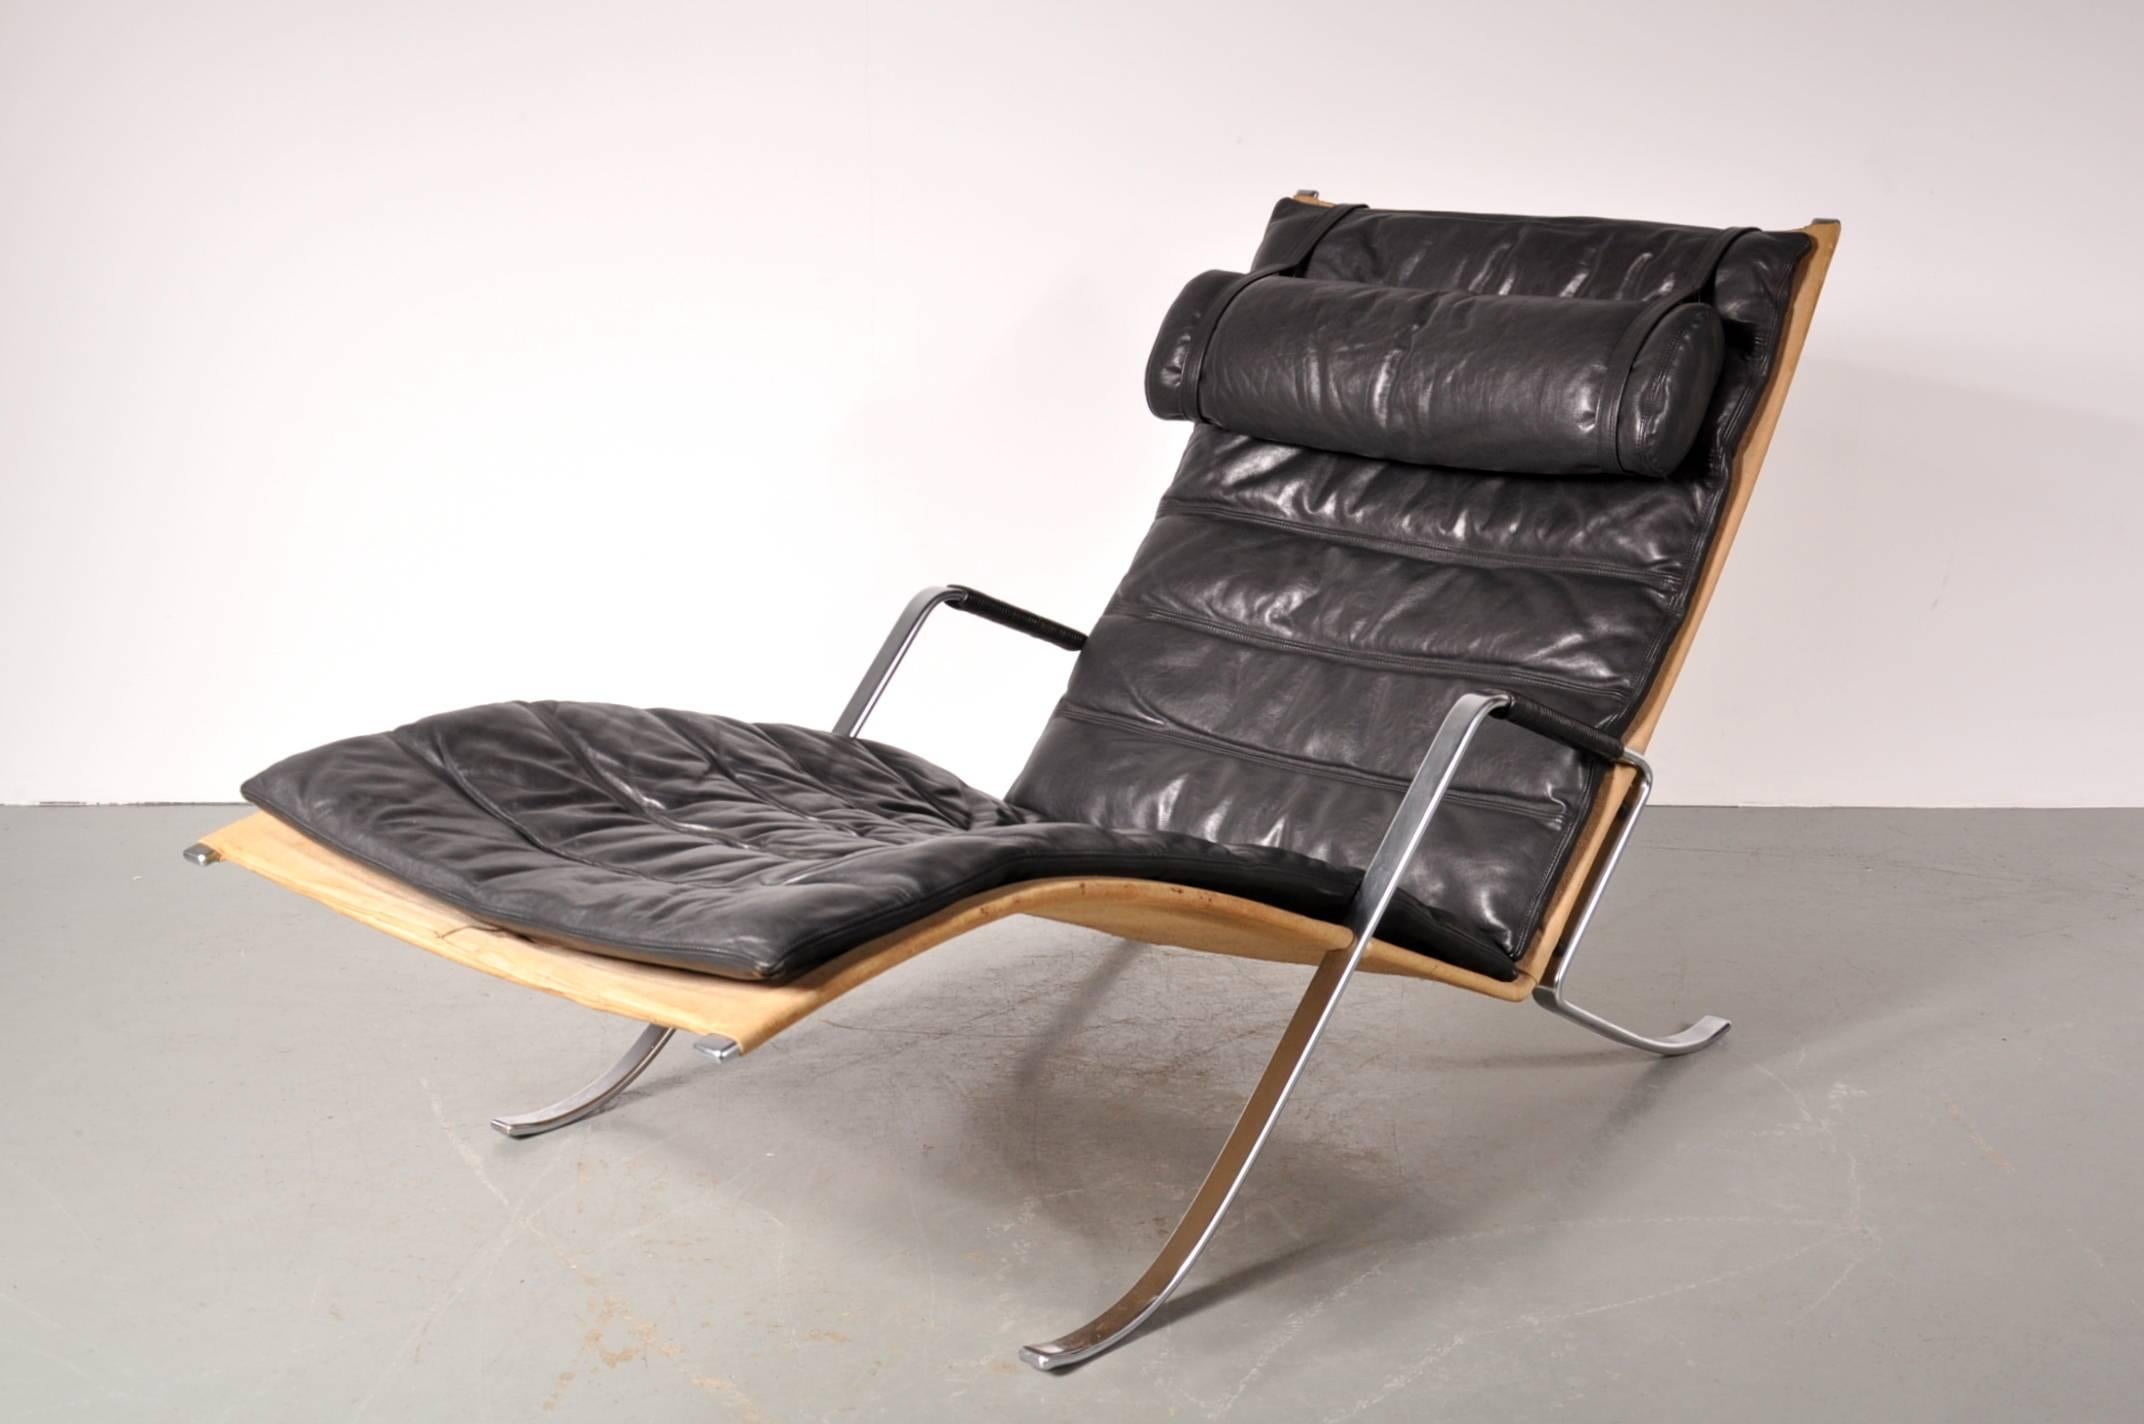 Stunning first edition Grasshopper lounge chair designed by Preben Fabricius and Jørgen Kastholm, manufactured by Kill International in Denmark in 1967.

This very rare original piece has a chrome metal with canvas base and is upholstered in the